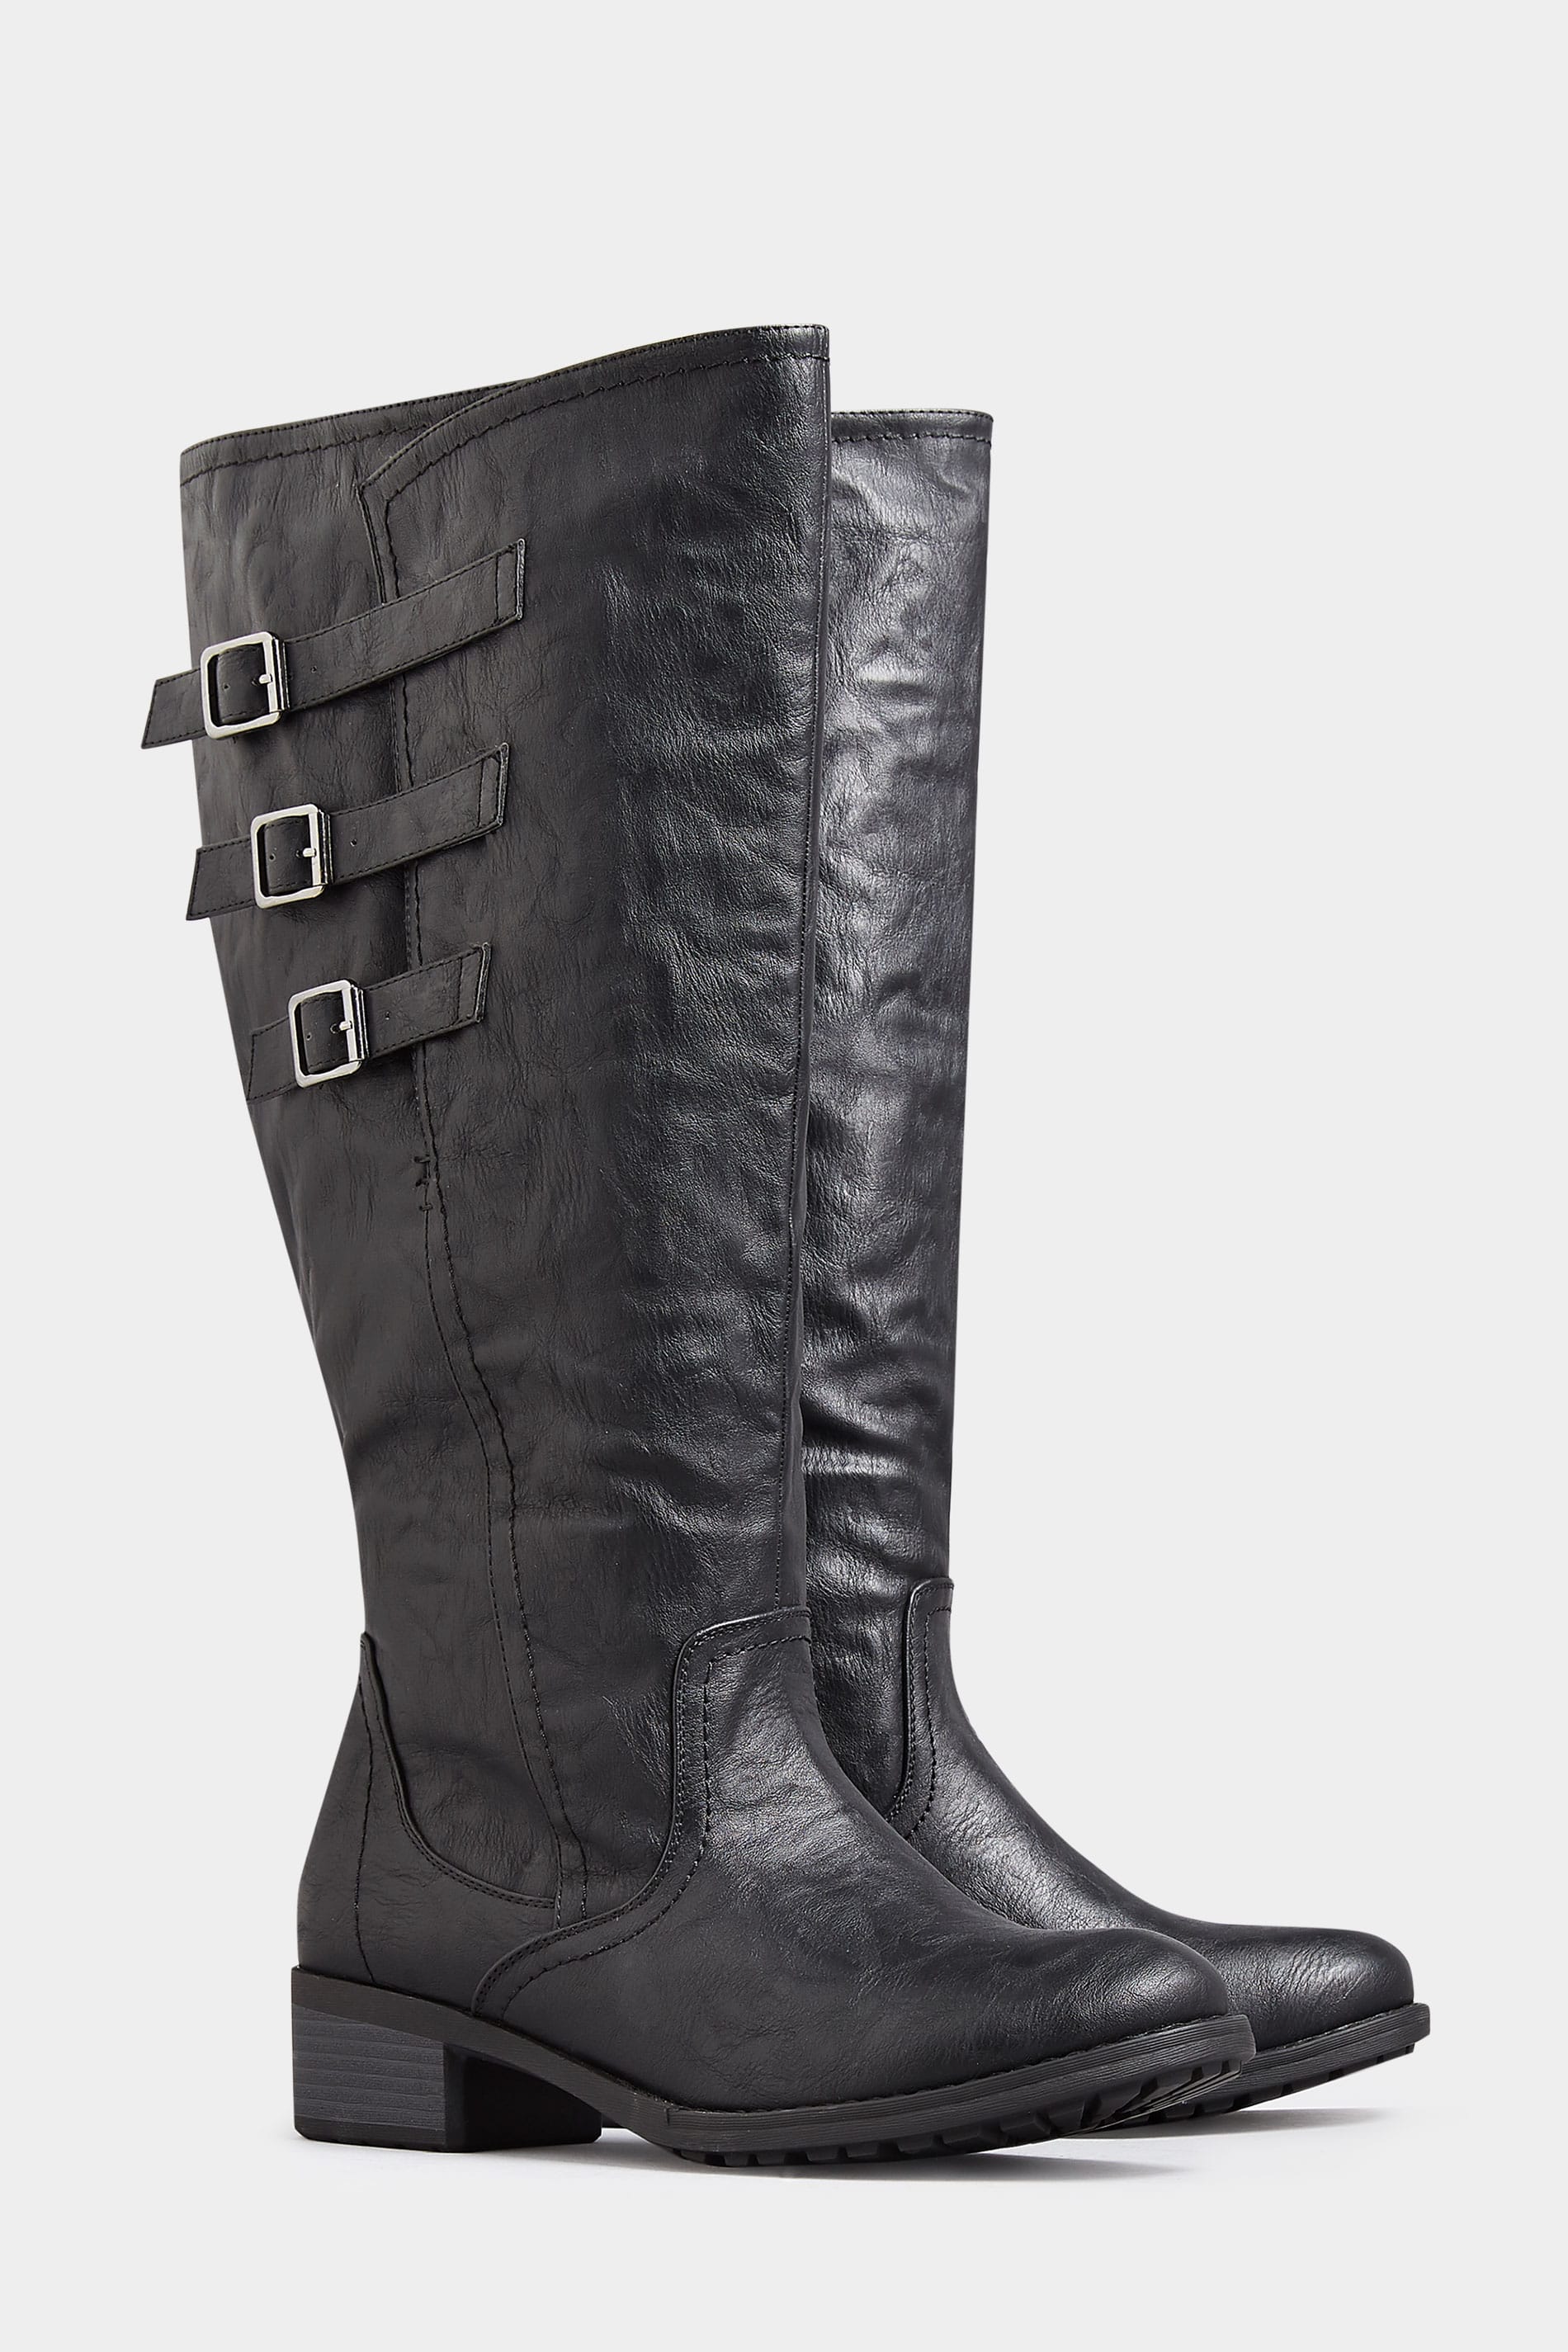 Black Knee High Boots In Extra Wide Fit With Adjustable Straps_0e2b.jpg